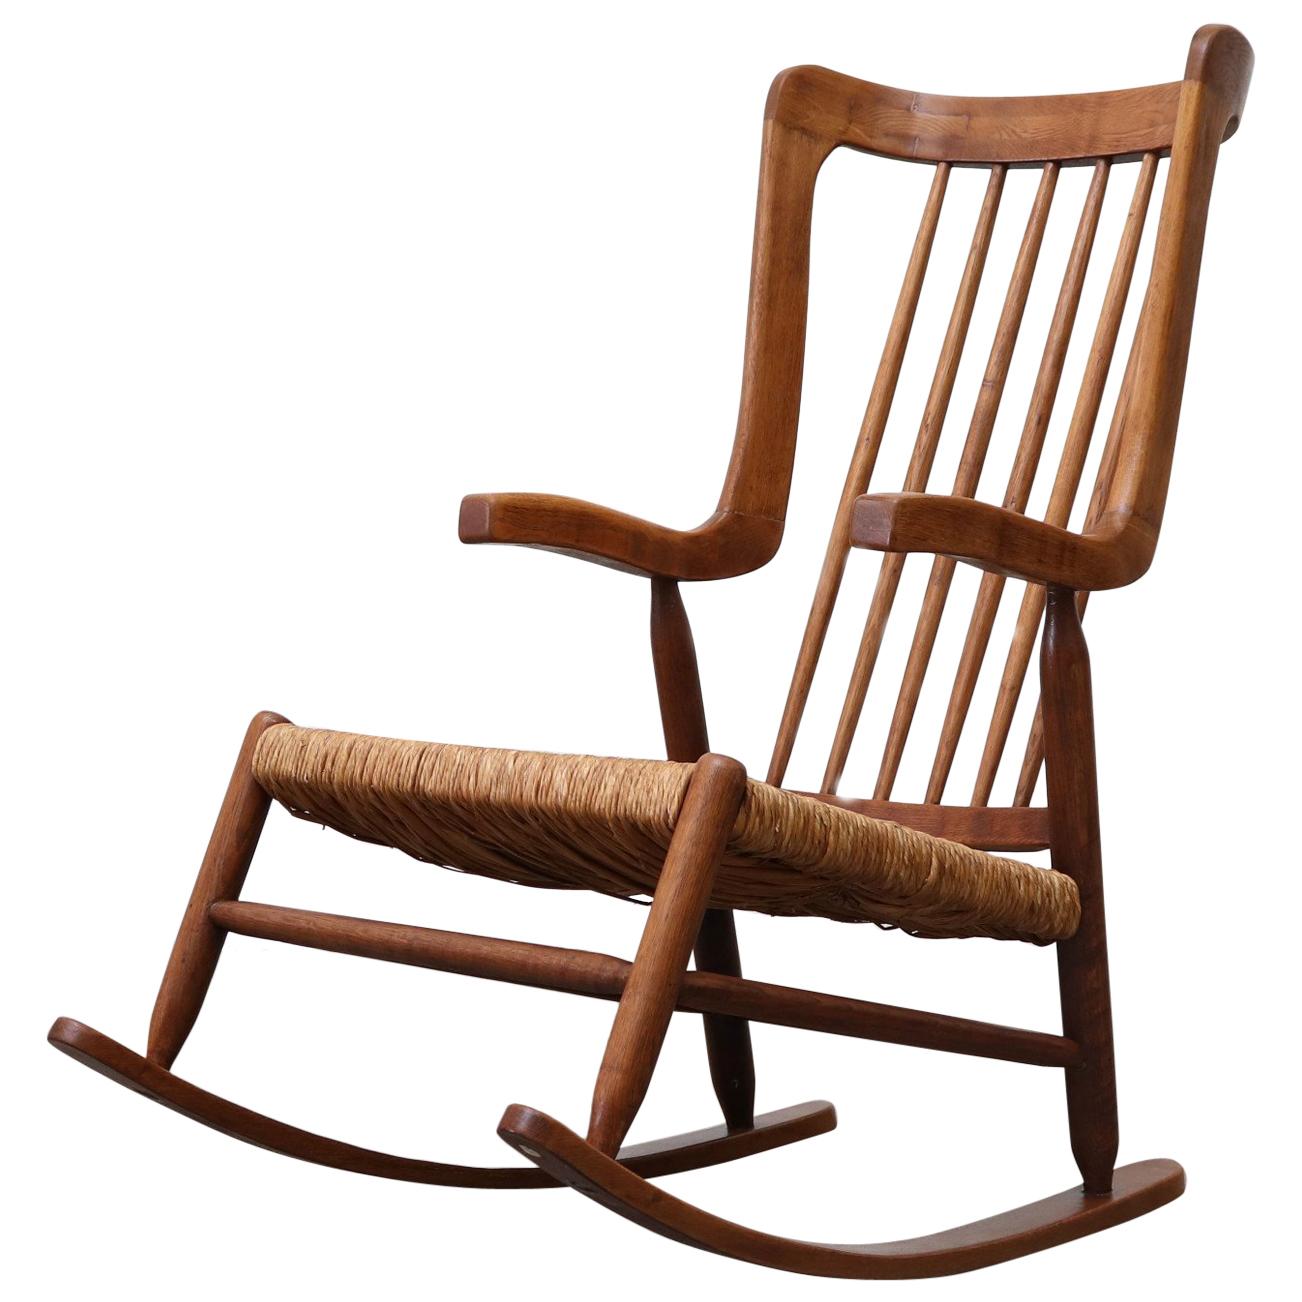 Simple Rocking Chairs For Sale Near Me for Small Space